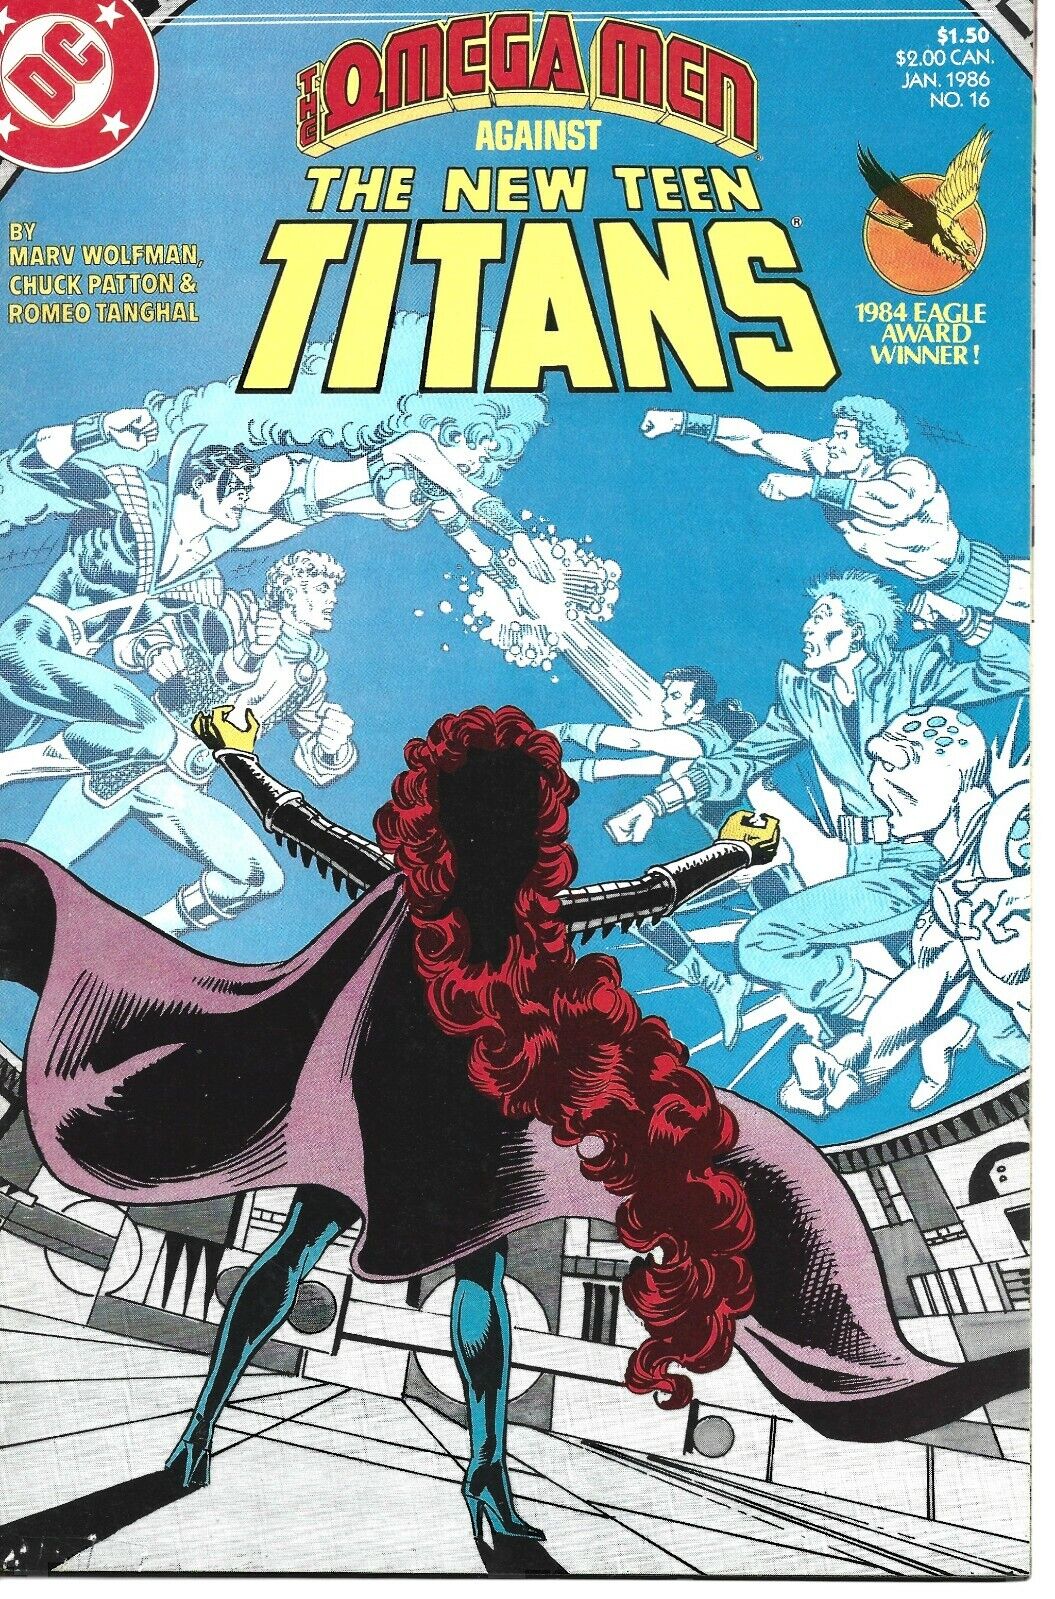 NEW TEEN TITANS #16 DC COMICS 1986 BAGGED AND BOARDED